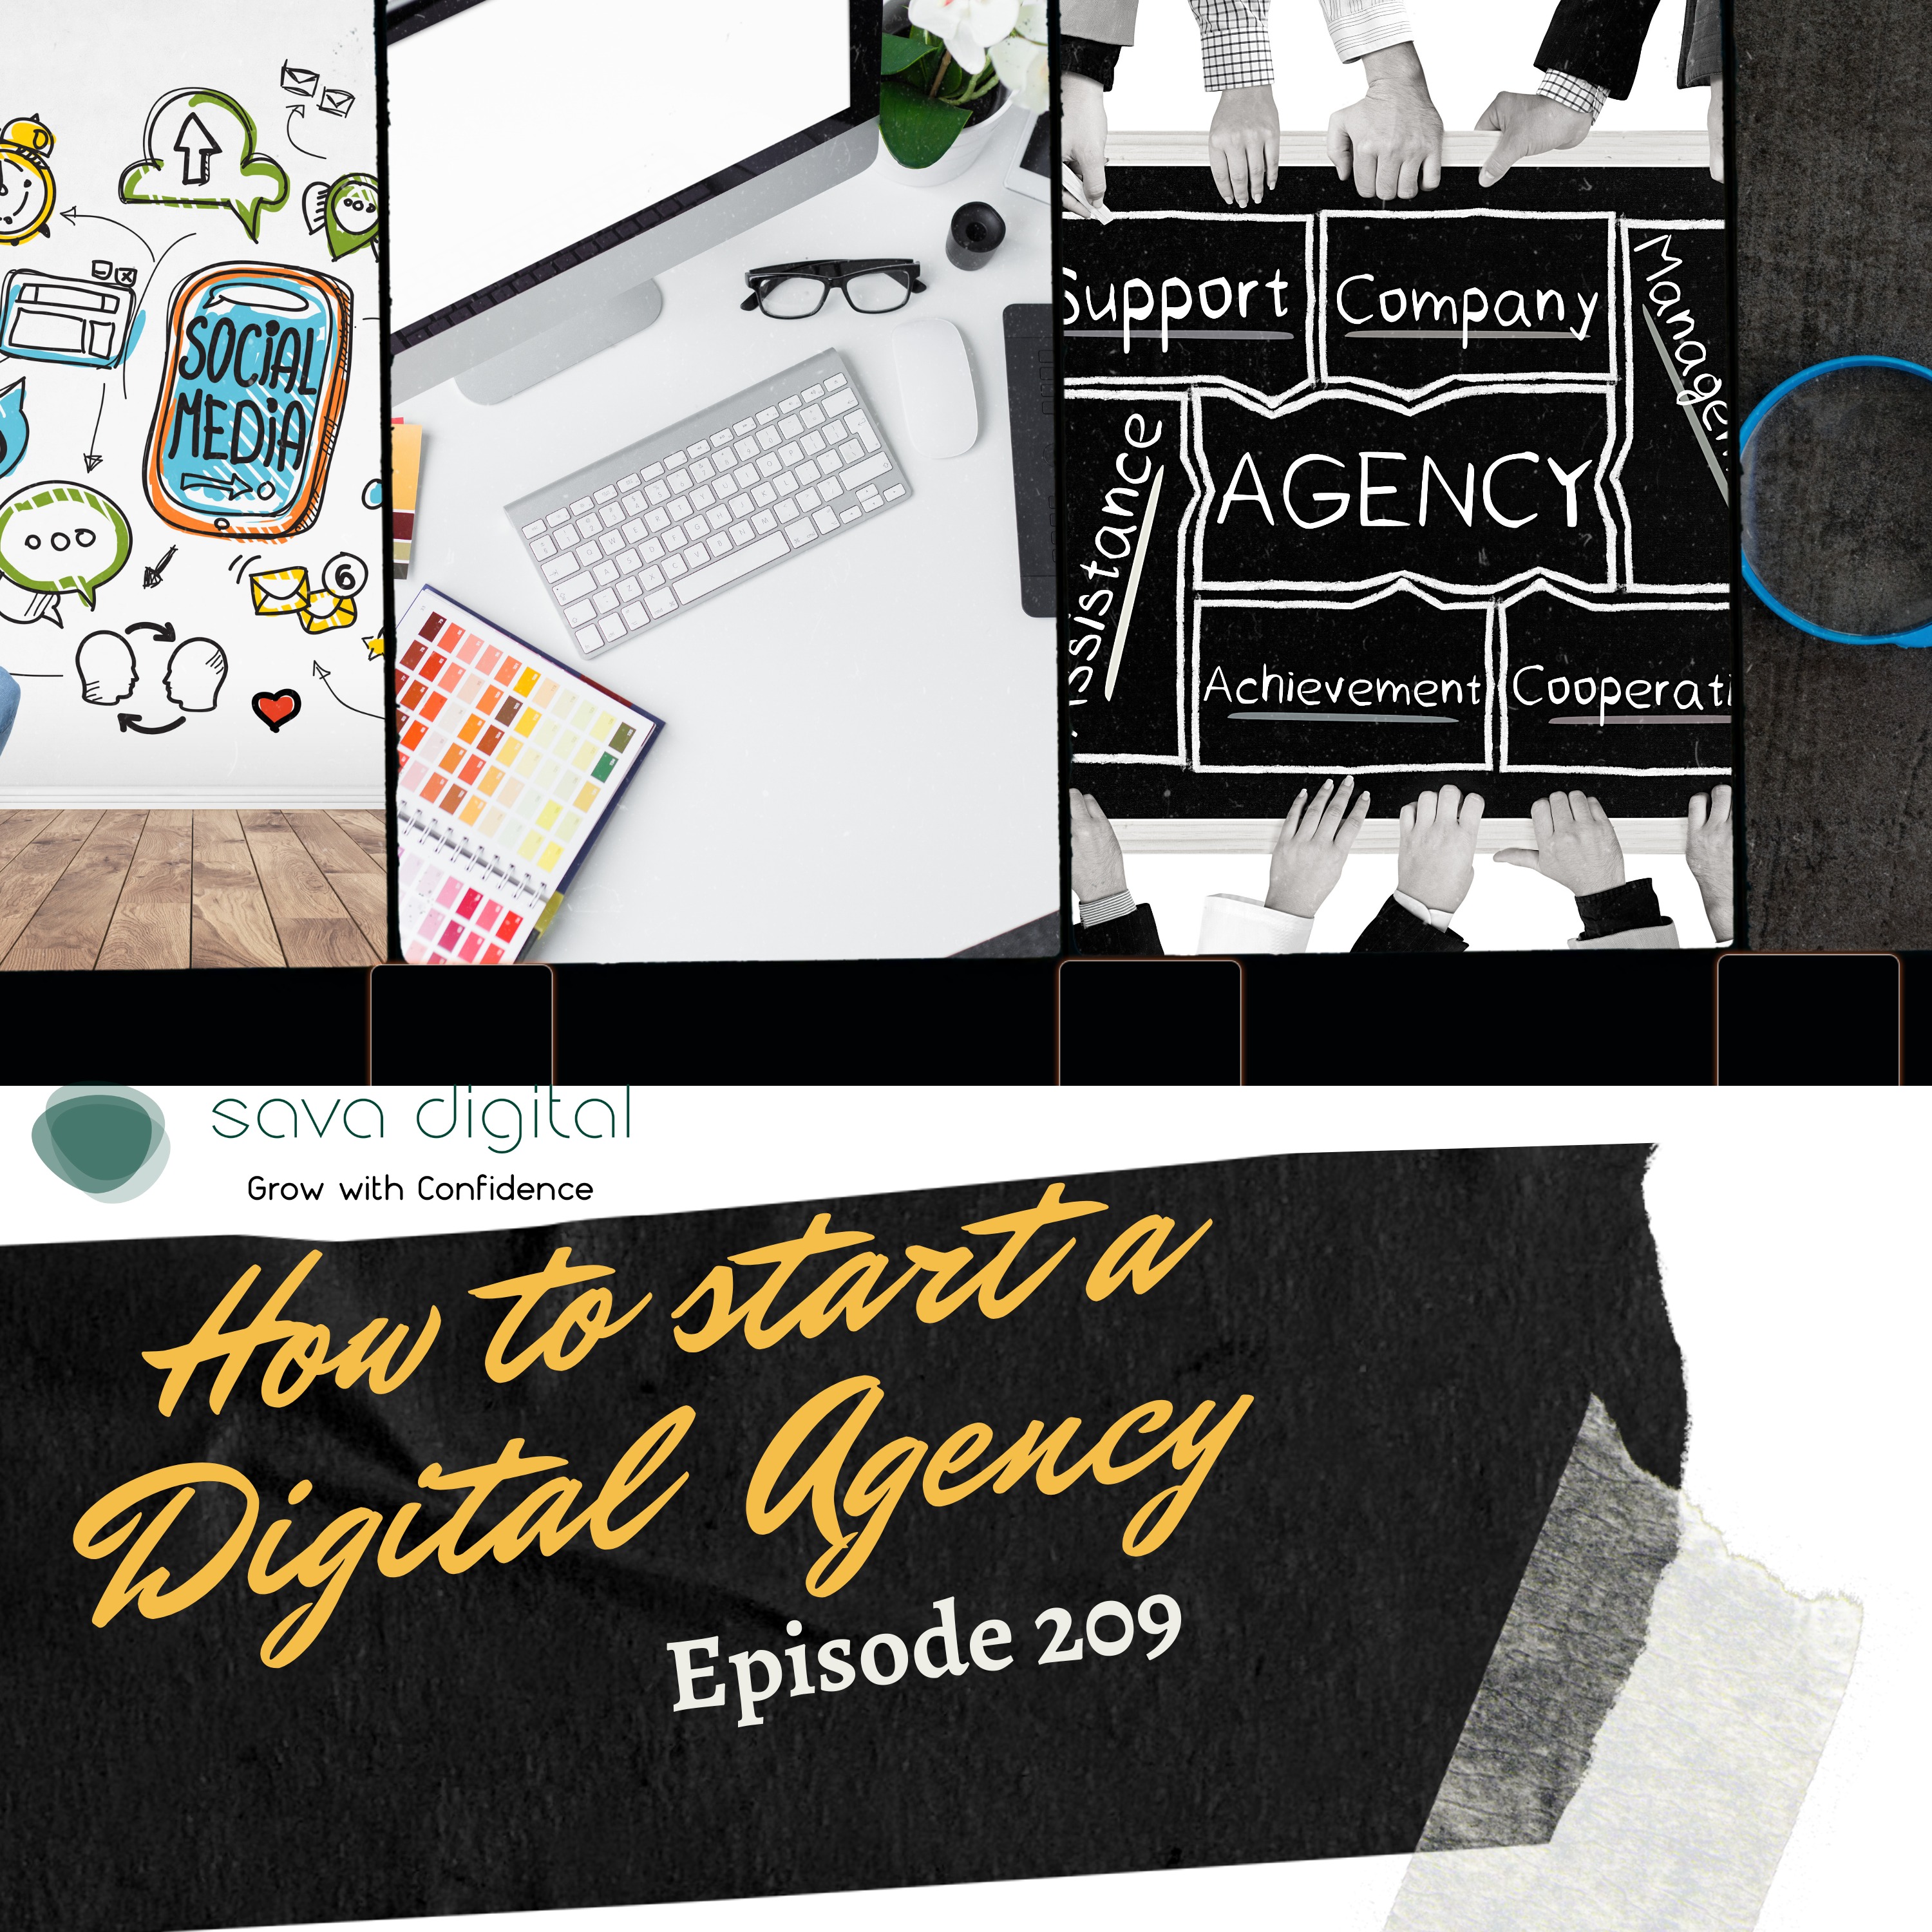 EP 209 : How to start a Digital Agency | Agency Life Series